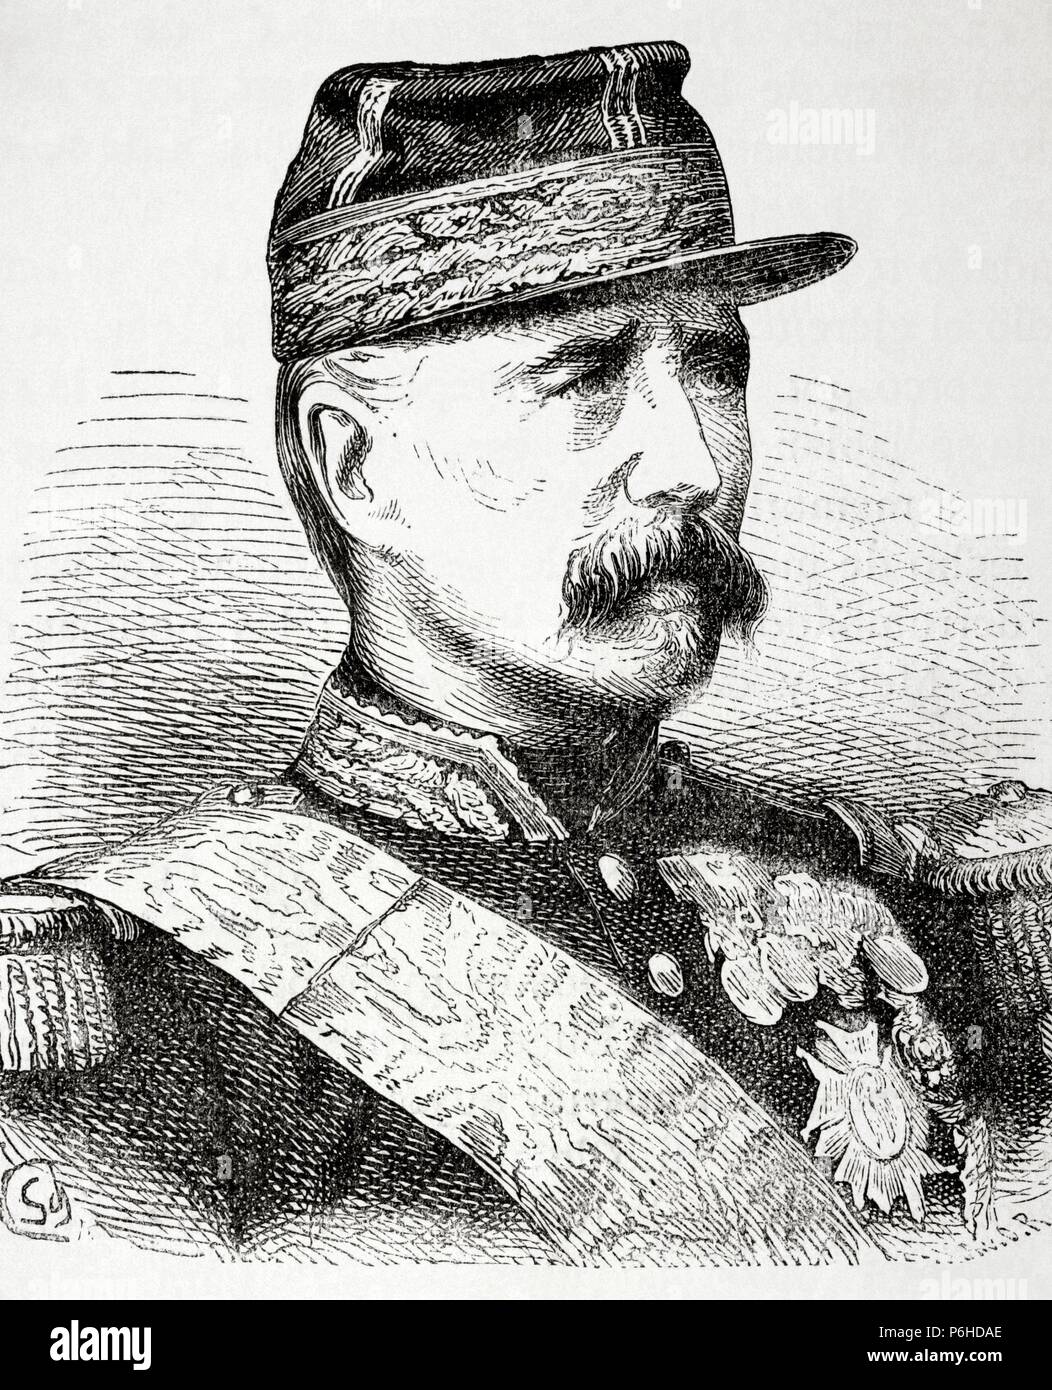 Marshal Marie Esme Patrice Maurice de MacMahon, 1st Duke of Magenta (1808 Ð 1893). French general and politician with the distinction Marshal of France. First president of the Third Republic, from 1875 to 1879. Engraving by Brend'Amor. Nuestro Siglo, 1883. Stock Photo